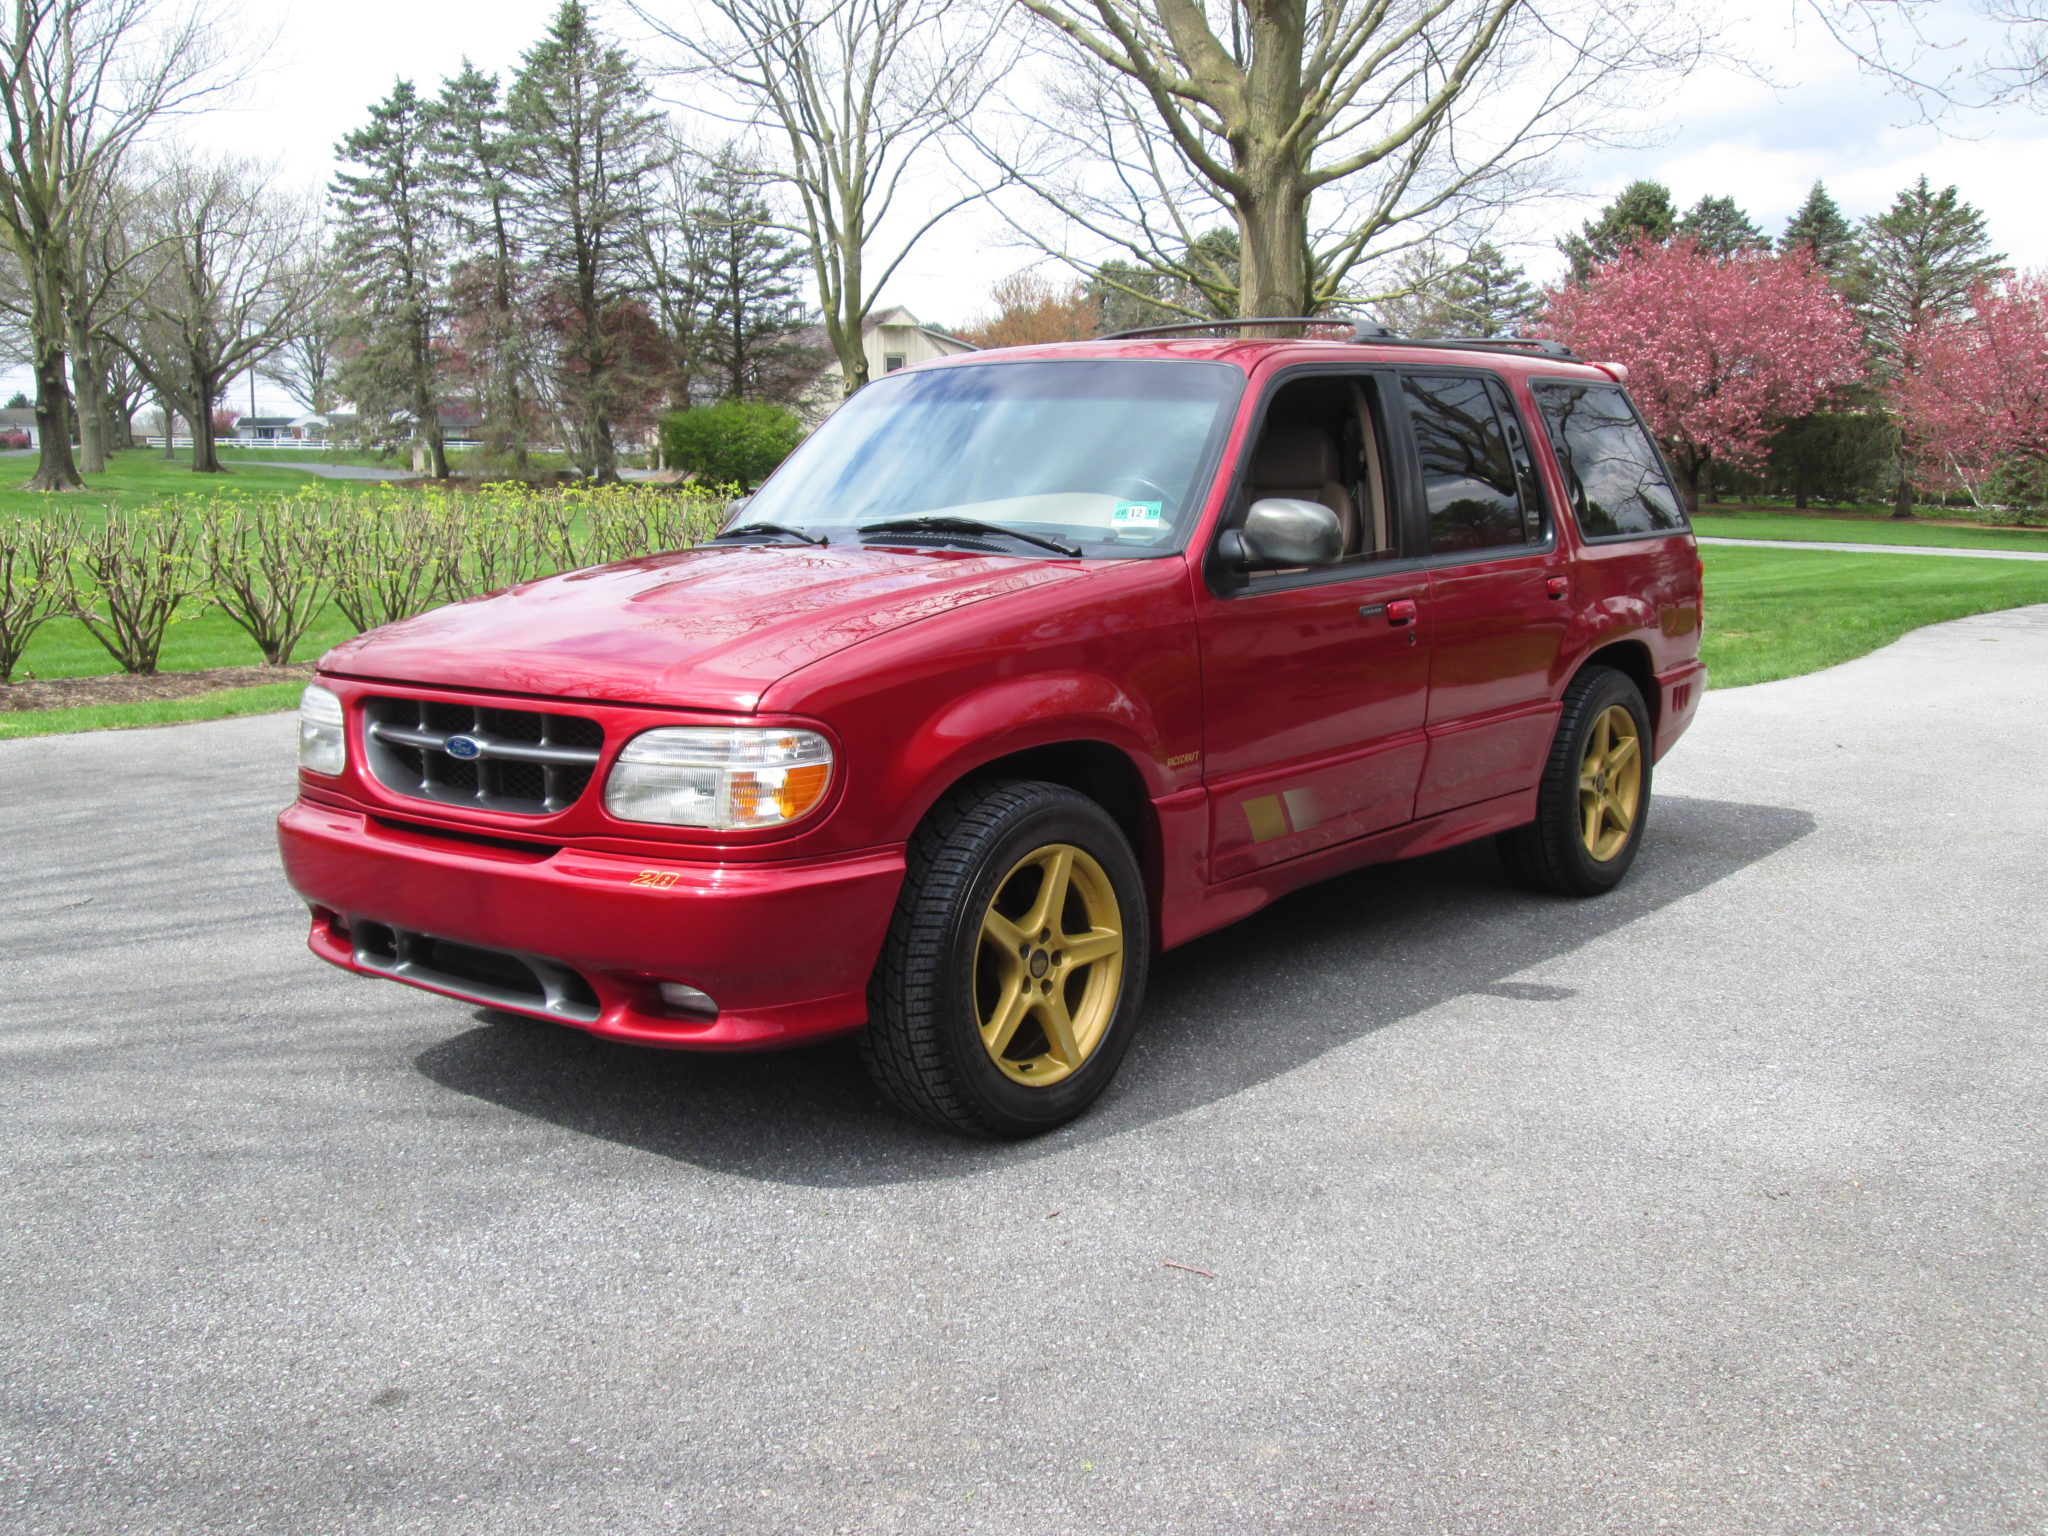 This 1998 Saleen Xp8 Ford Explorer For Sale Is One Of 300 Produced